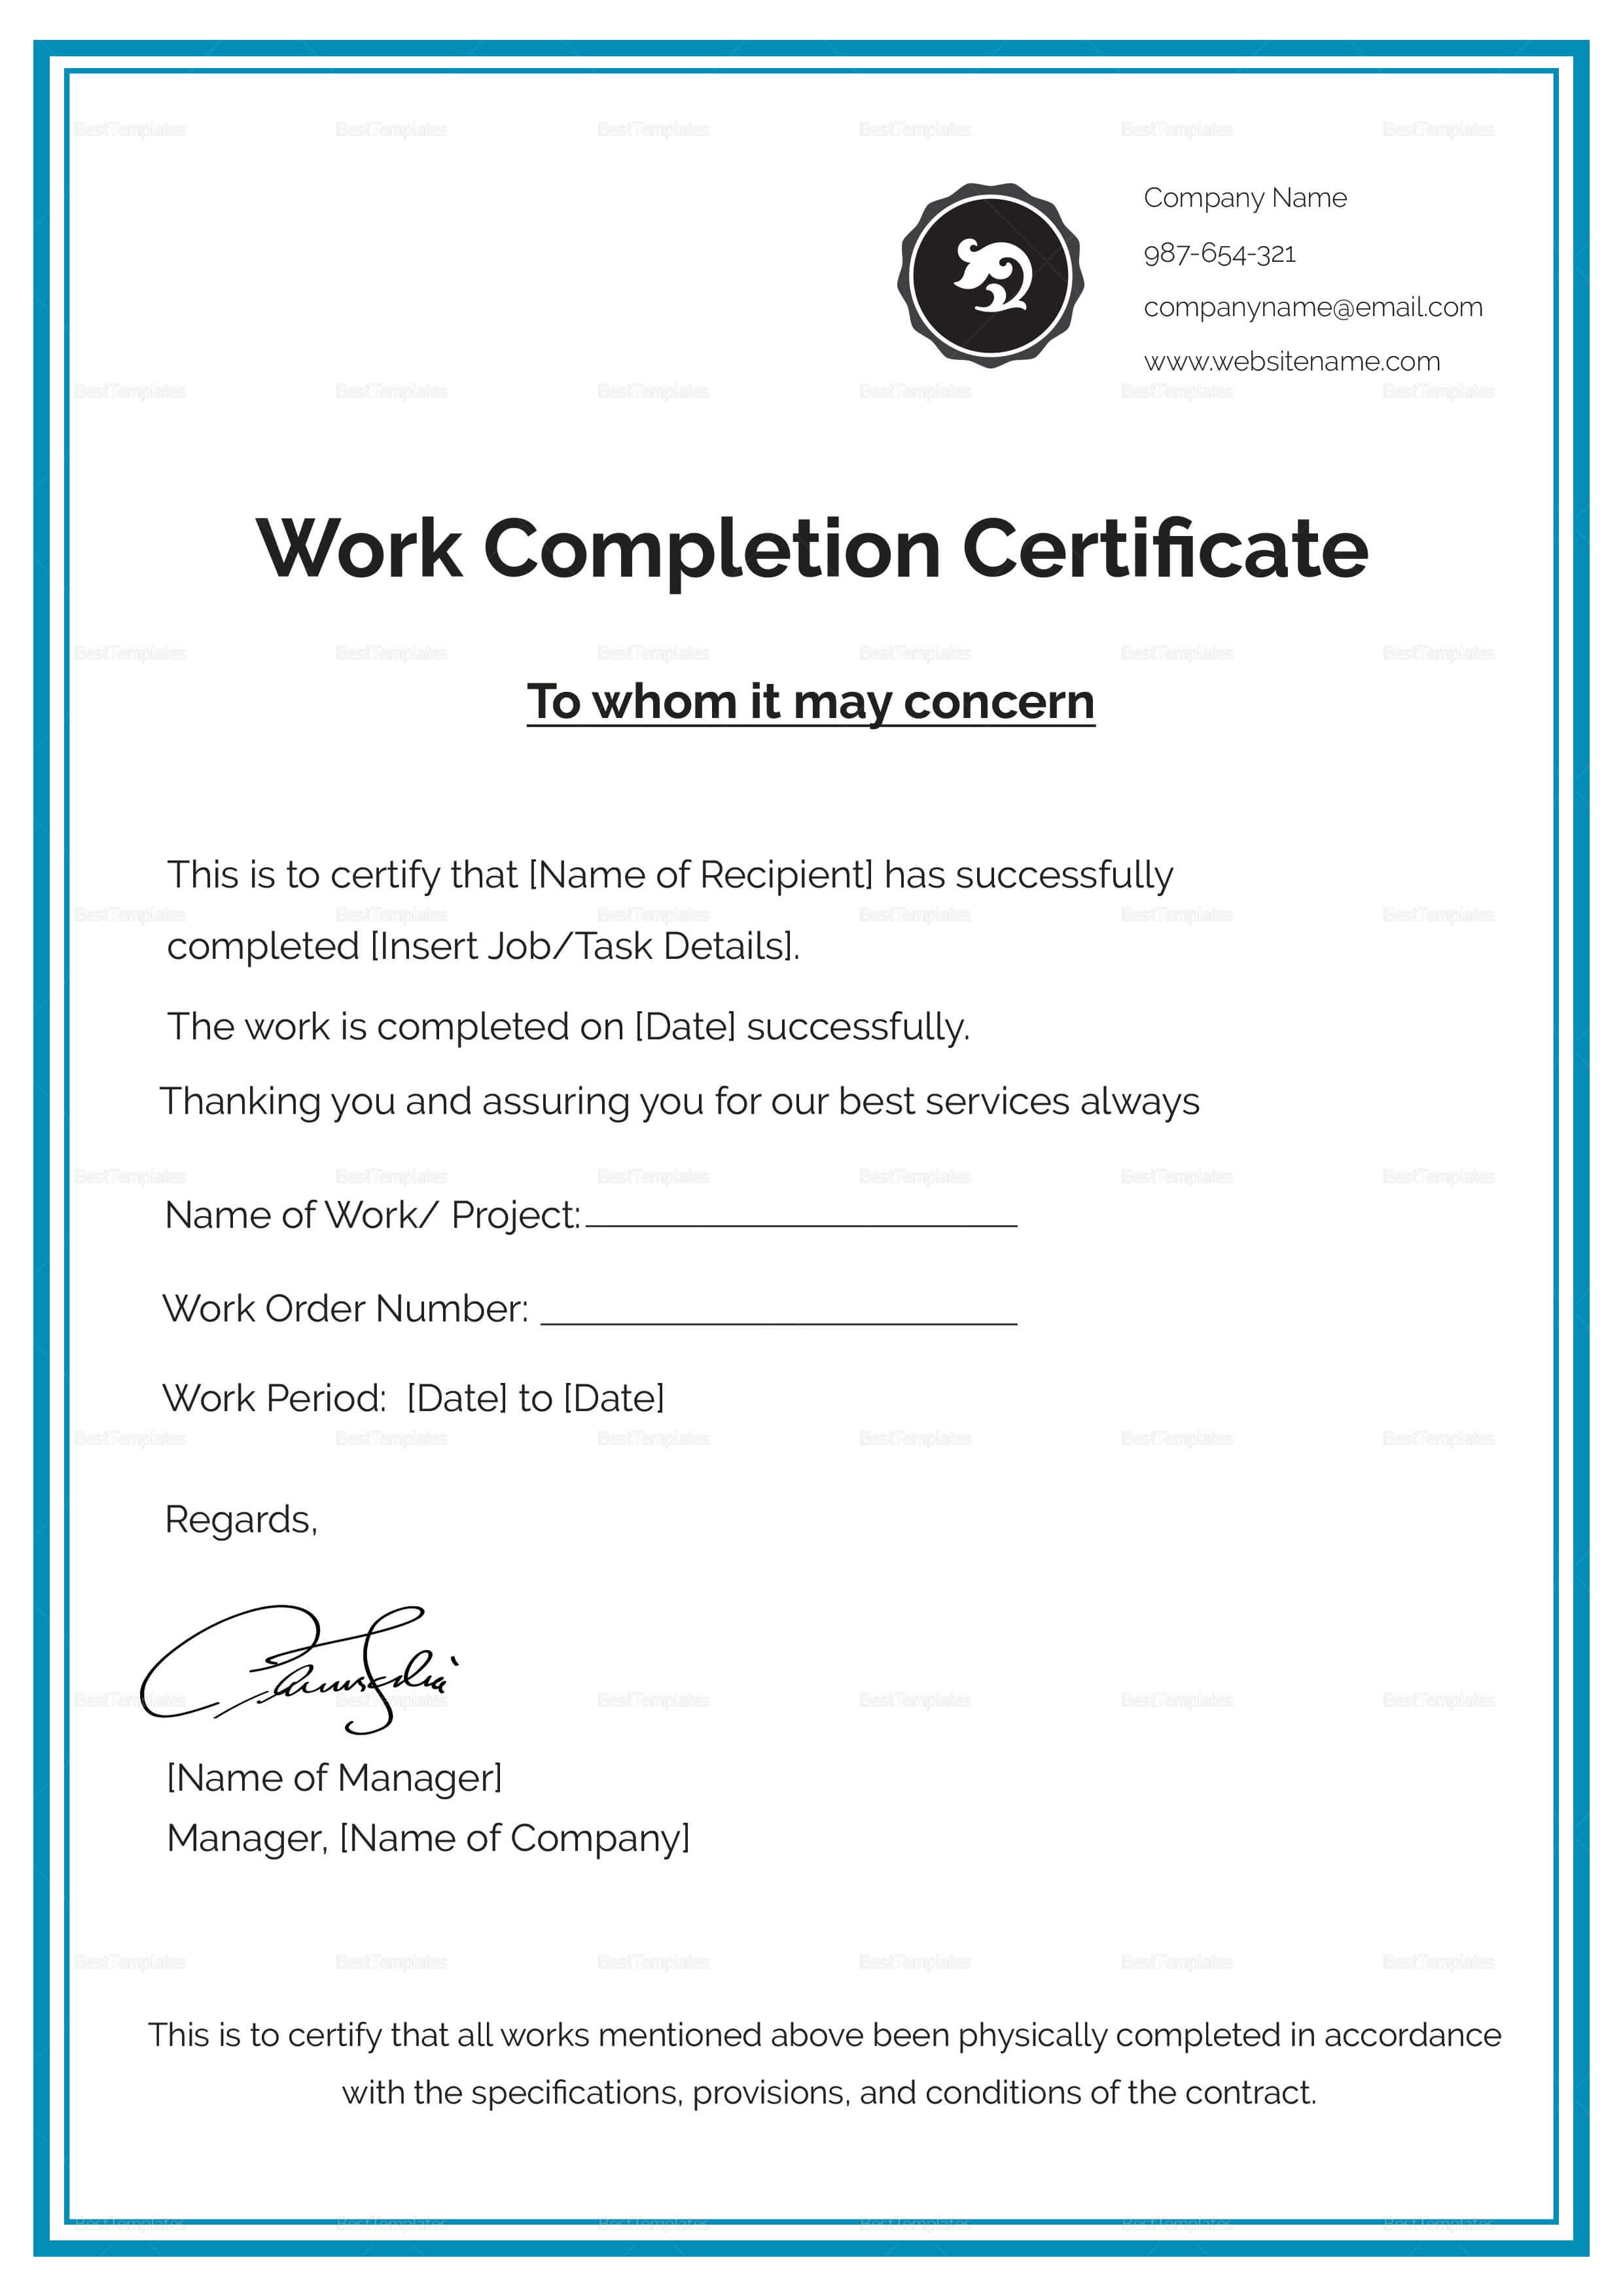 Pinadil Khan On Job In 2019 | Certificate Templates With Regard To Practical Completion Certificate Template Jct